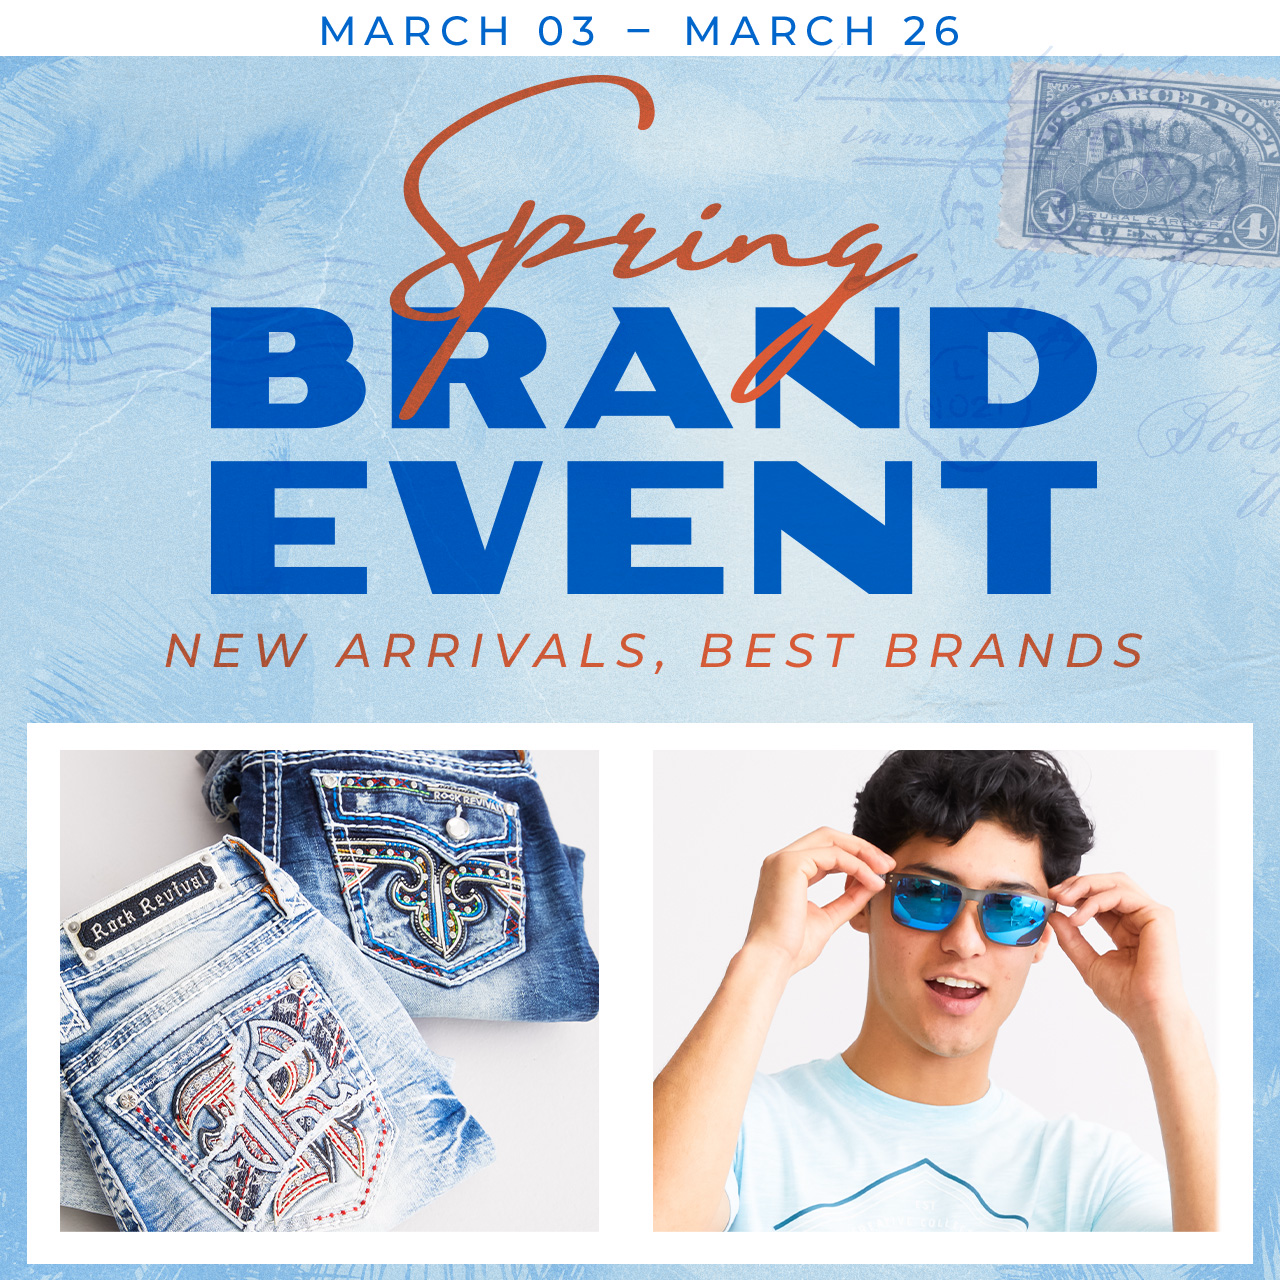 Spring Brand Event Wardrobe Giveaway from Buckle